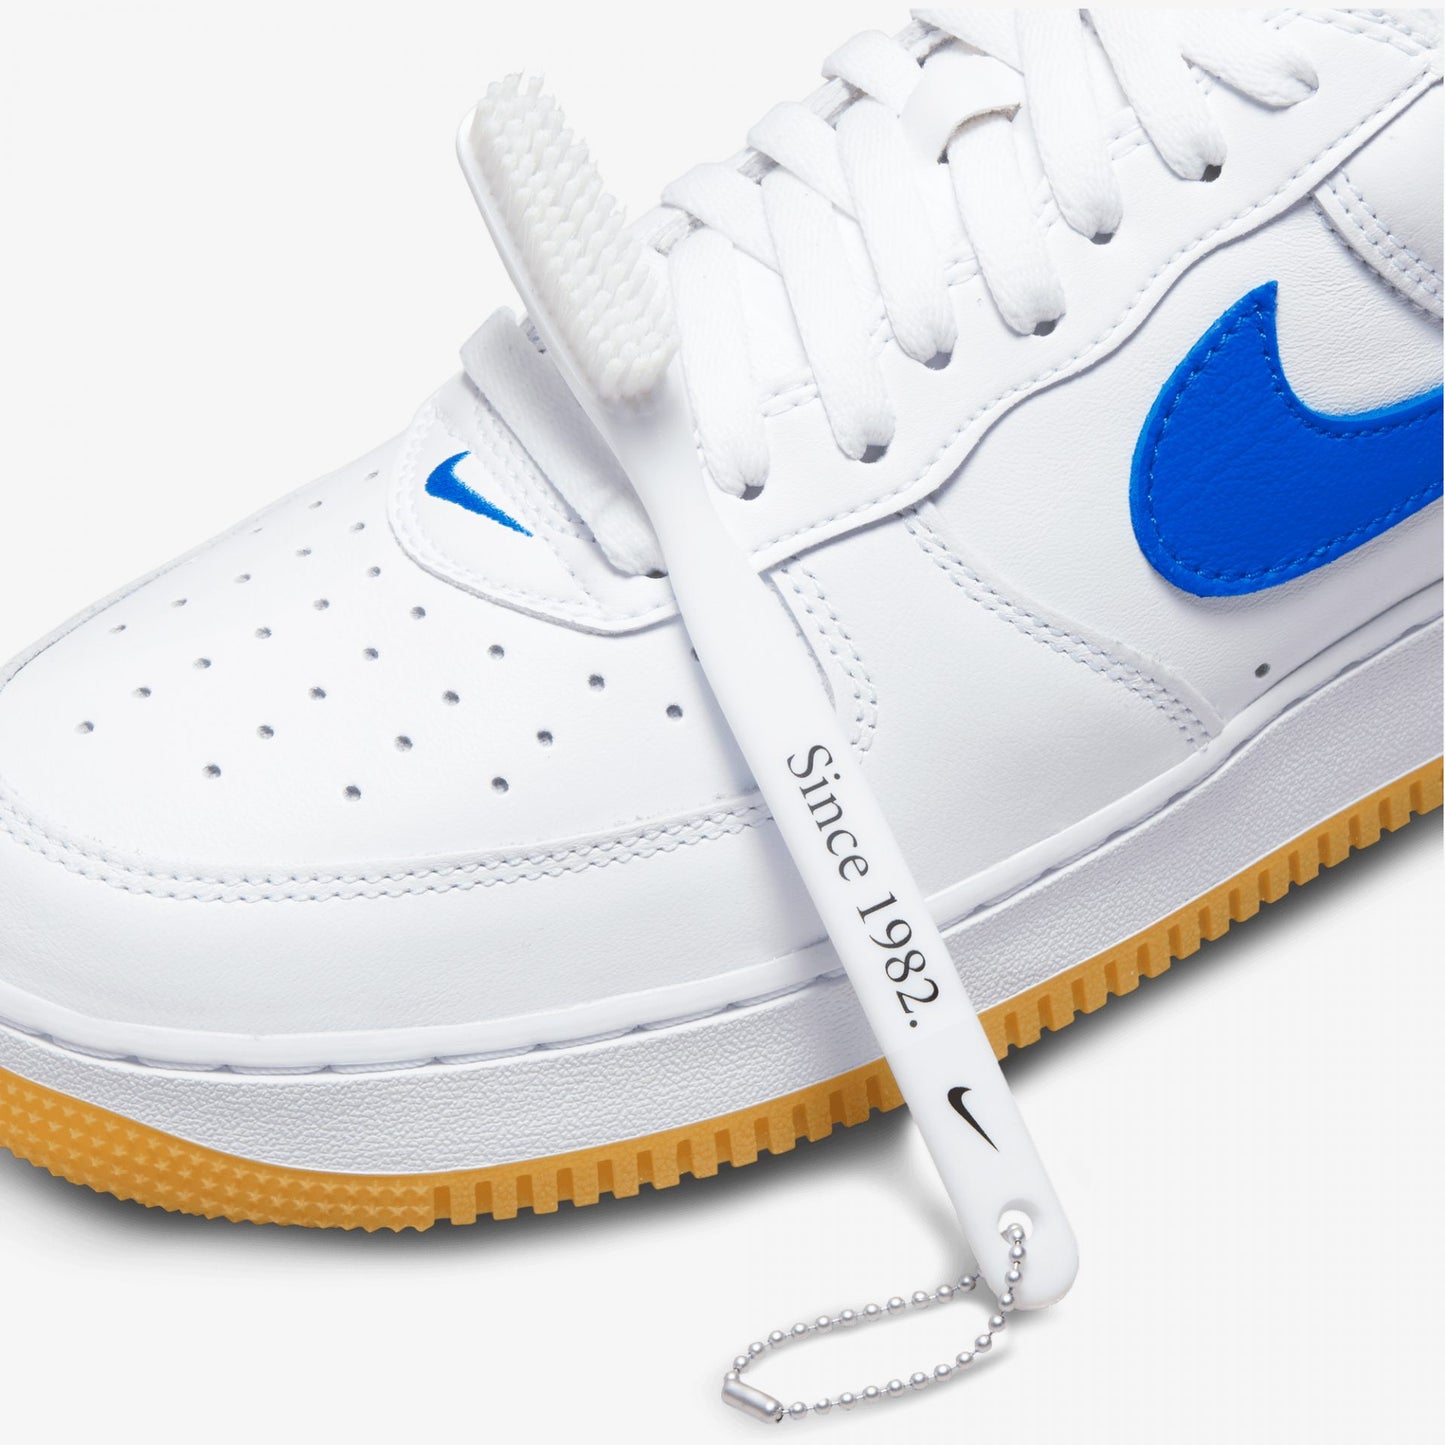 AIR FORCE 1 LOW RETRO 'COLOUR OF THE MONTH'